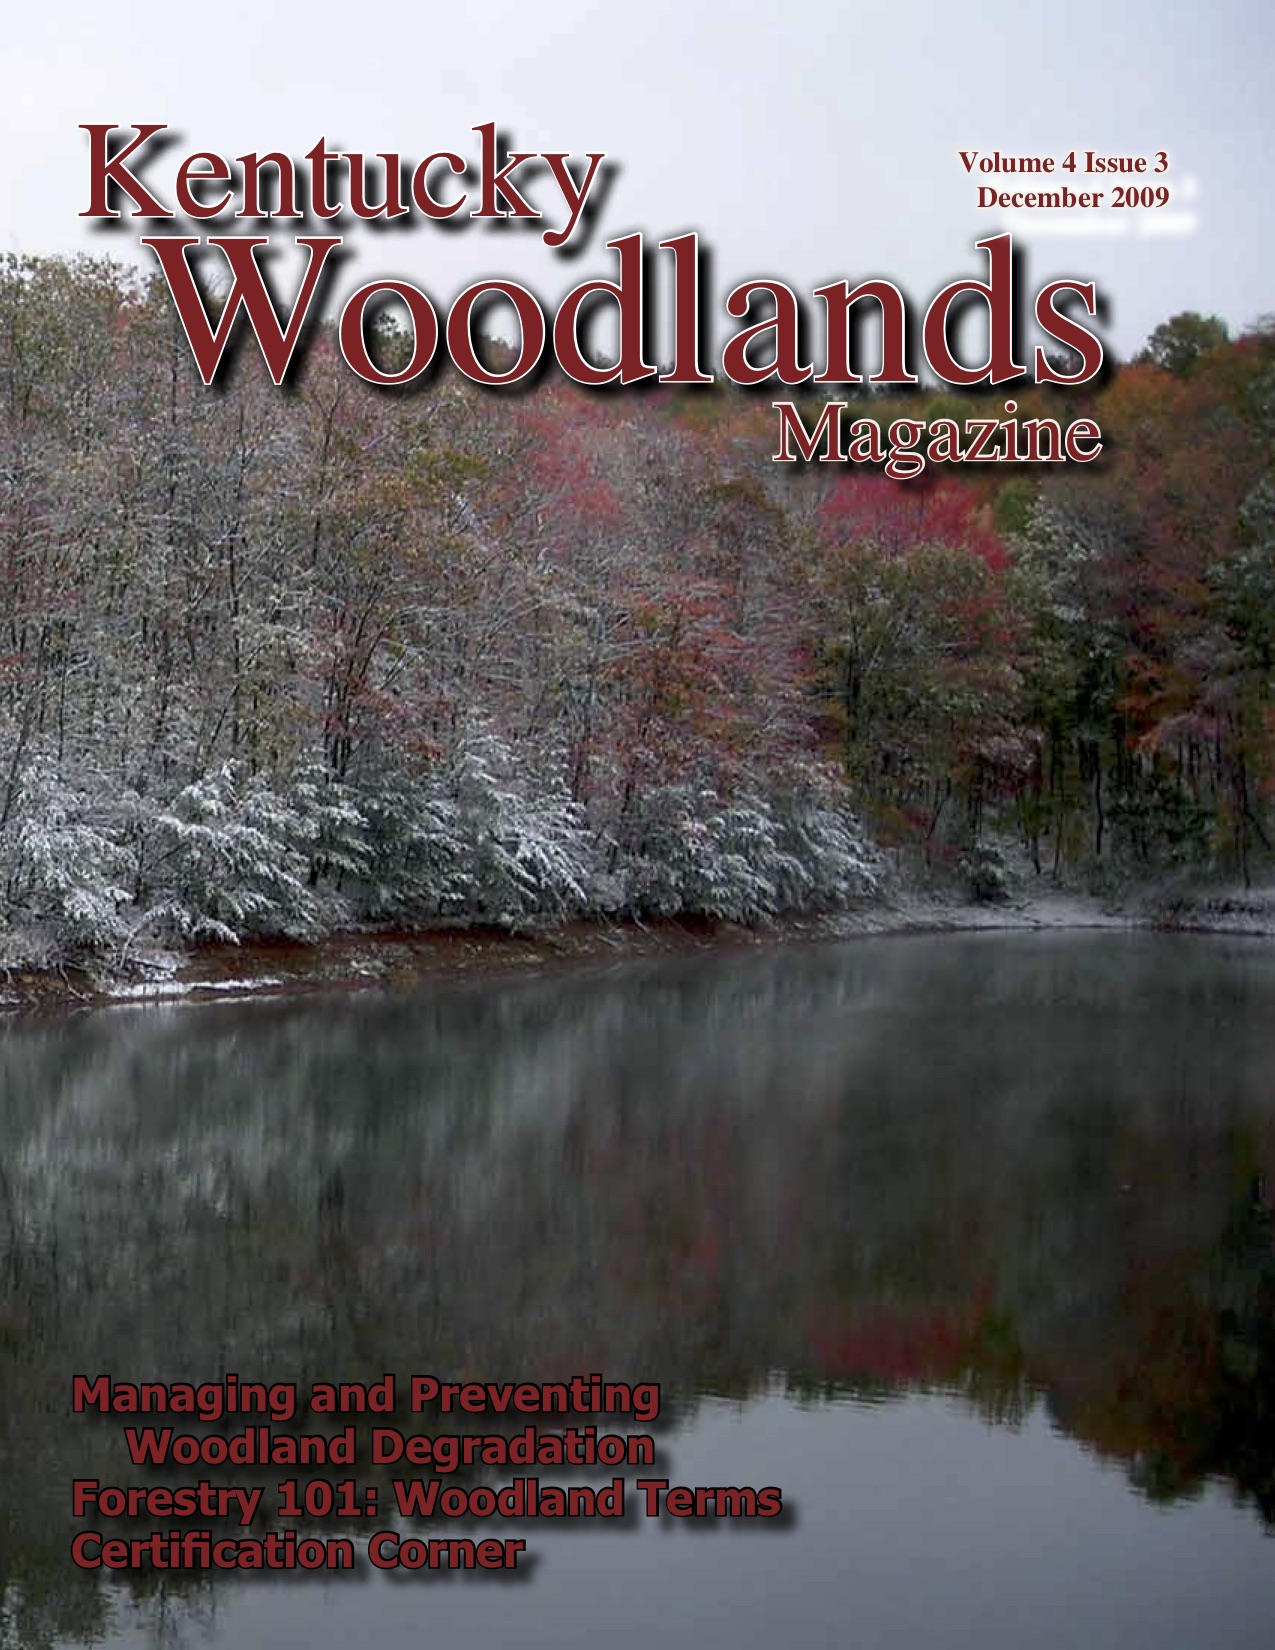 Kentucky Woodlands Magazine, Volume 4, Issue 3 Cover